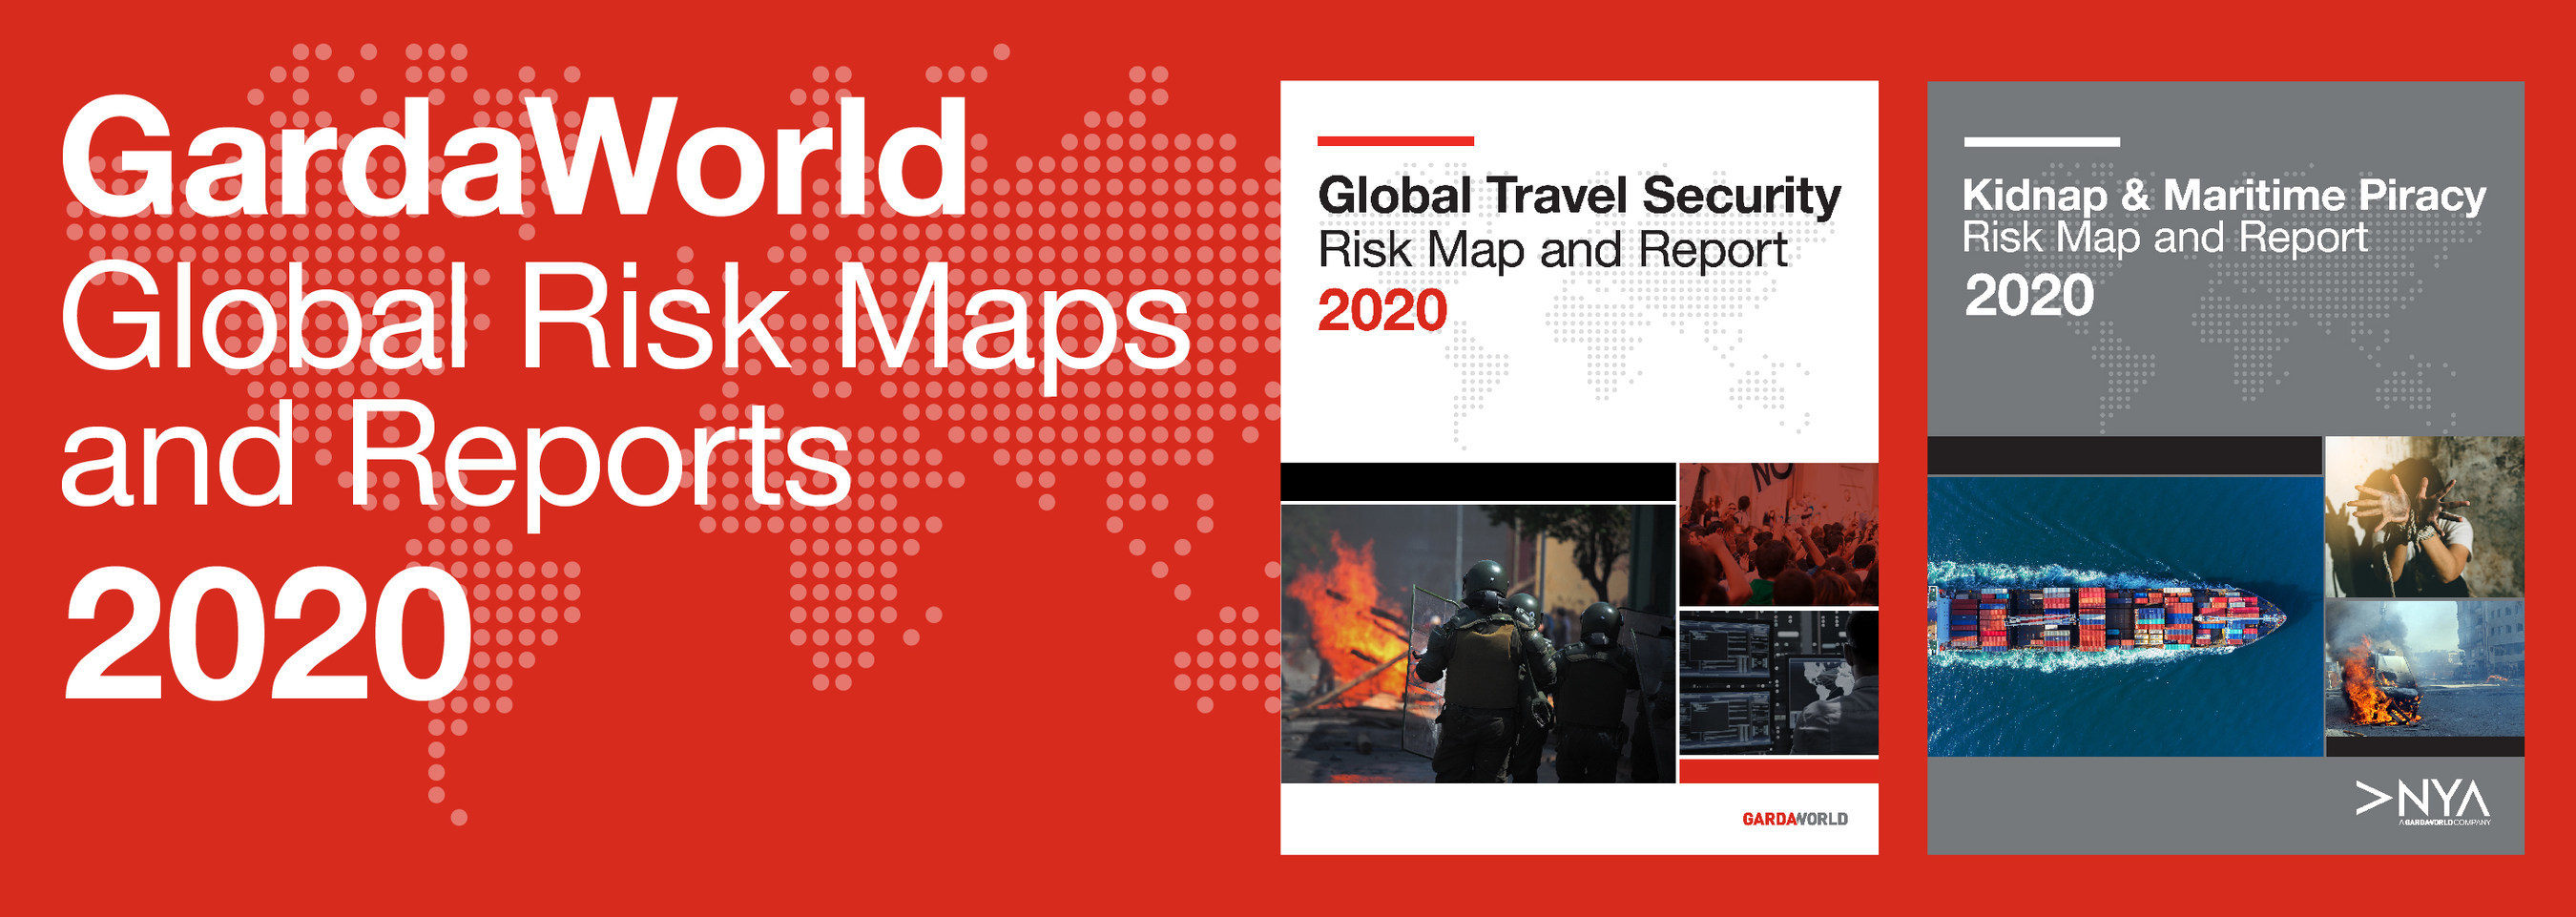 GardaWorld launches its 2020 Global Travel Security and Kidnap & Maritime  Piracy Risk Maps and Reports